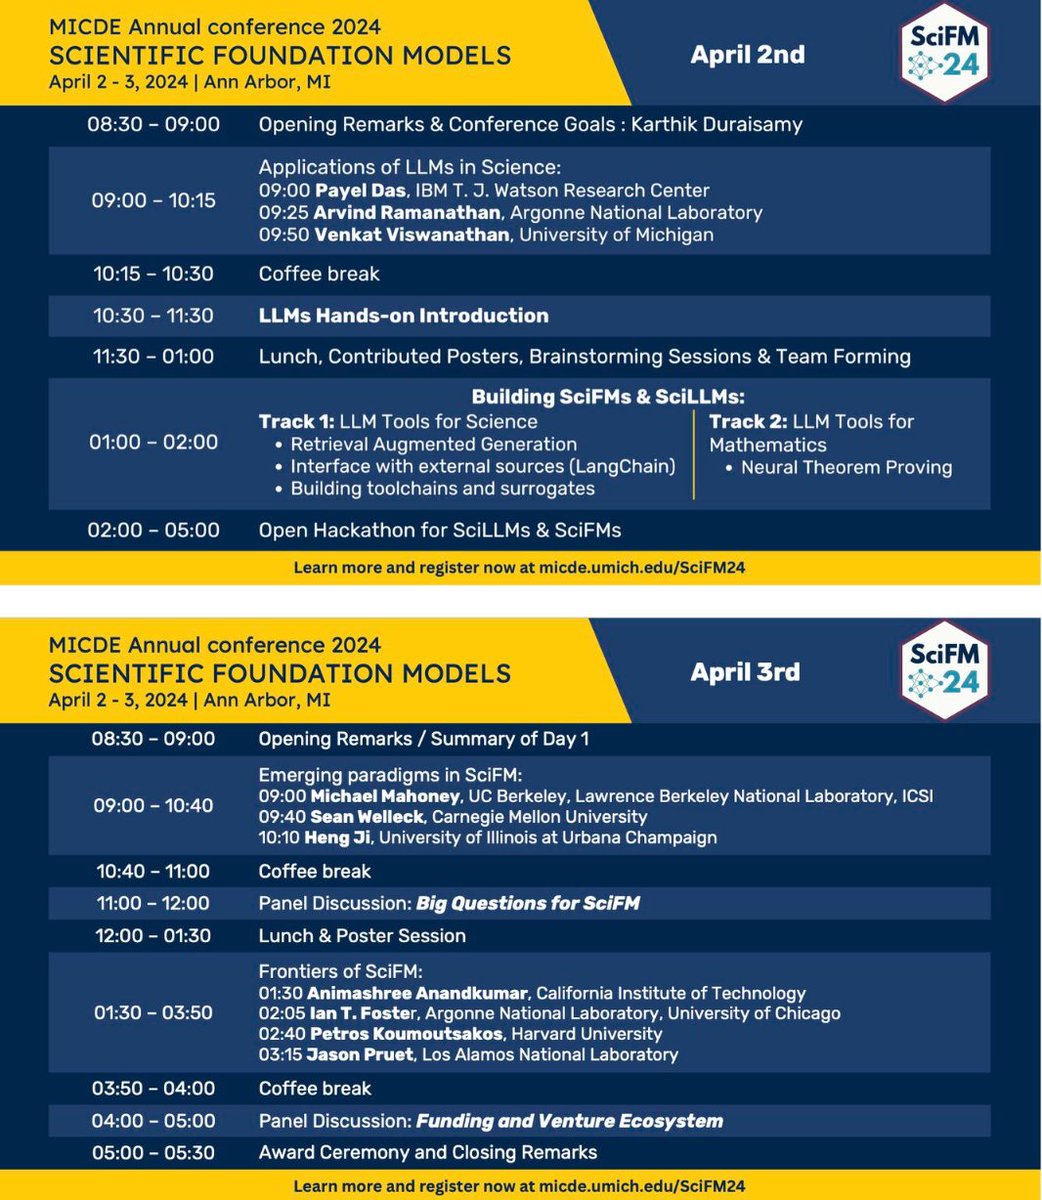 Excited to organize this conference dedicated to Scientific Foundations Model @UMich on April 2, 3! Workshops and Tutorials, incredible speaker covering wide range of topics, funding and venture ecosystem.